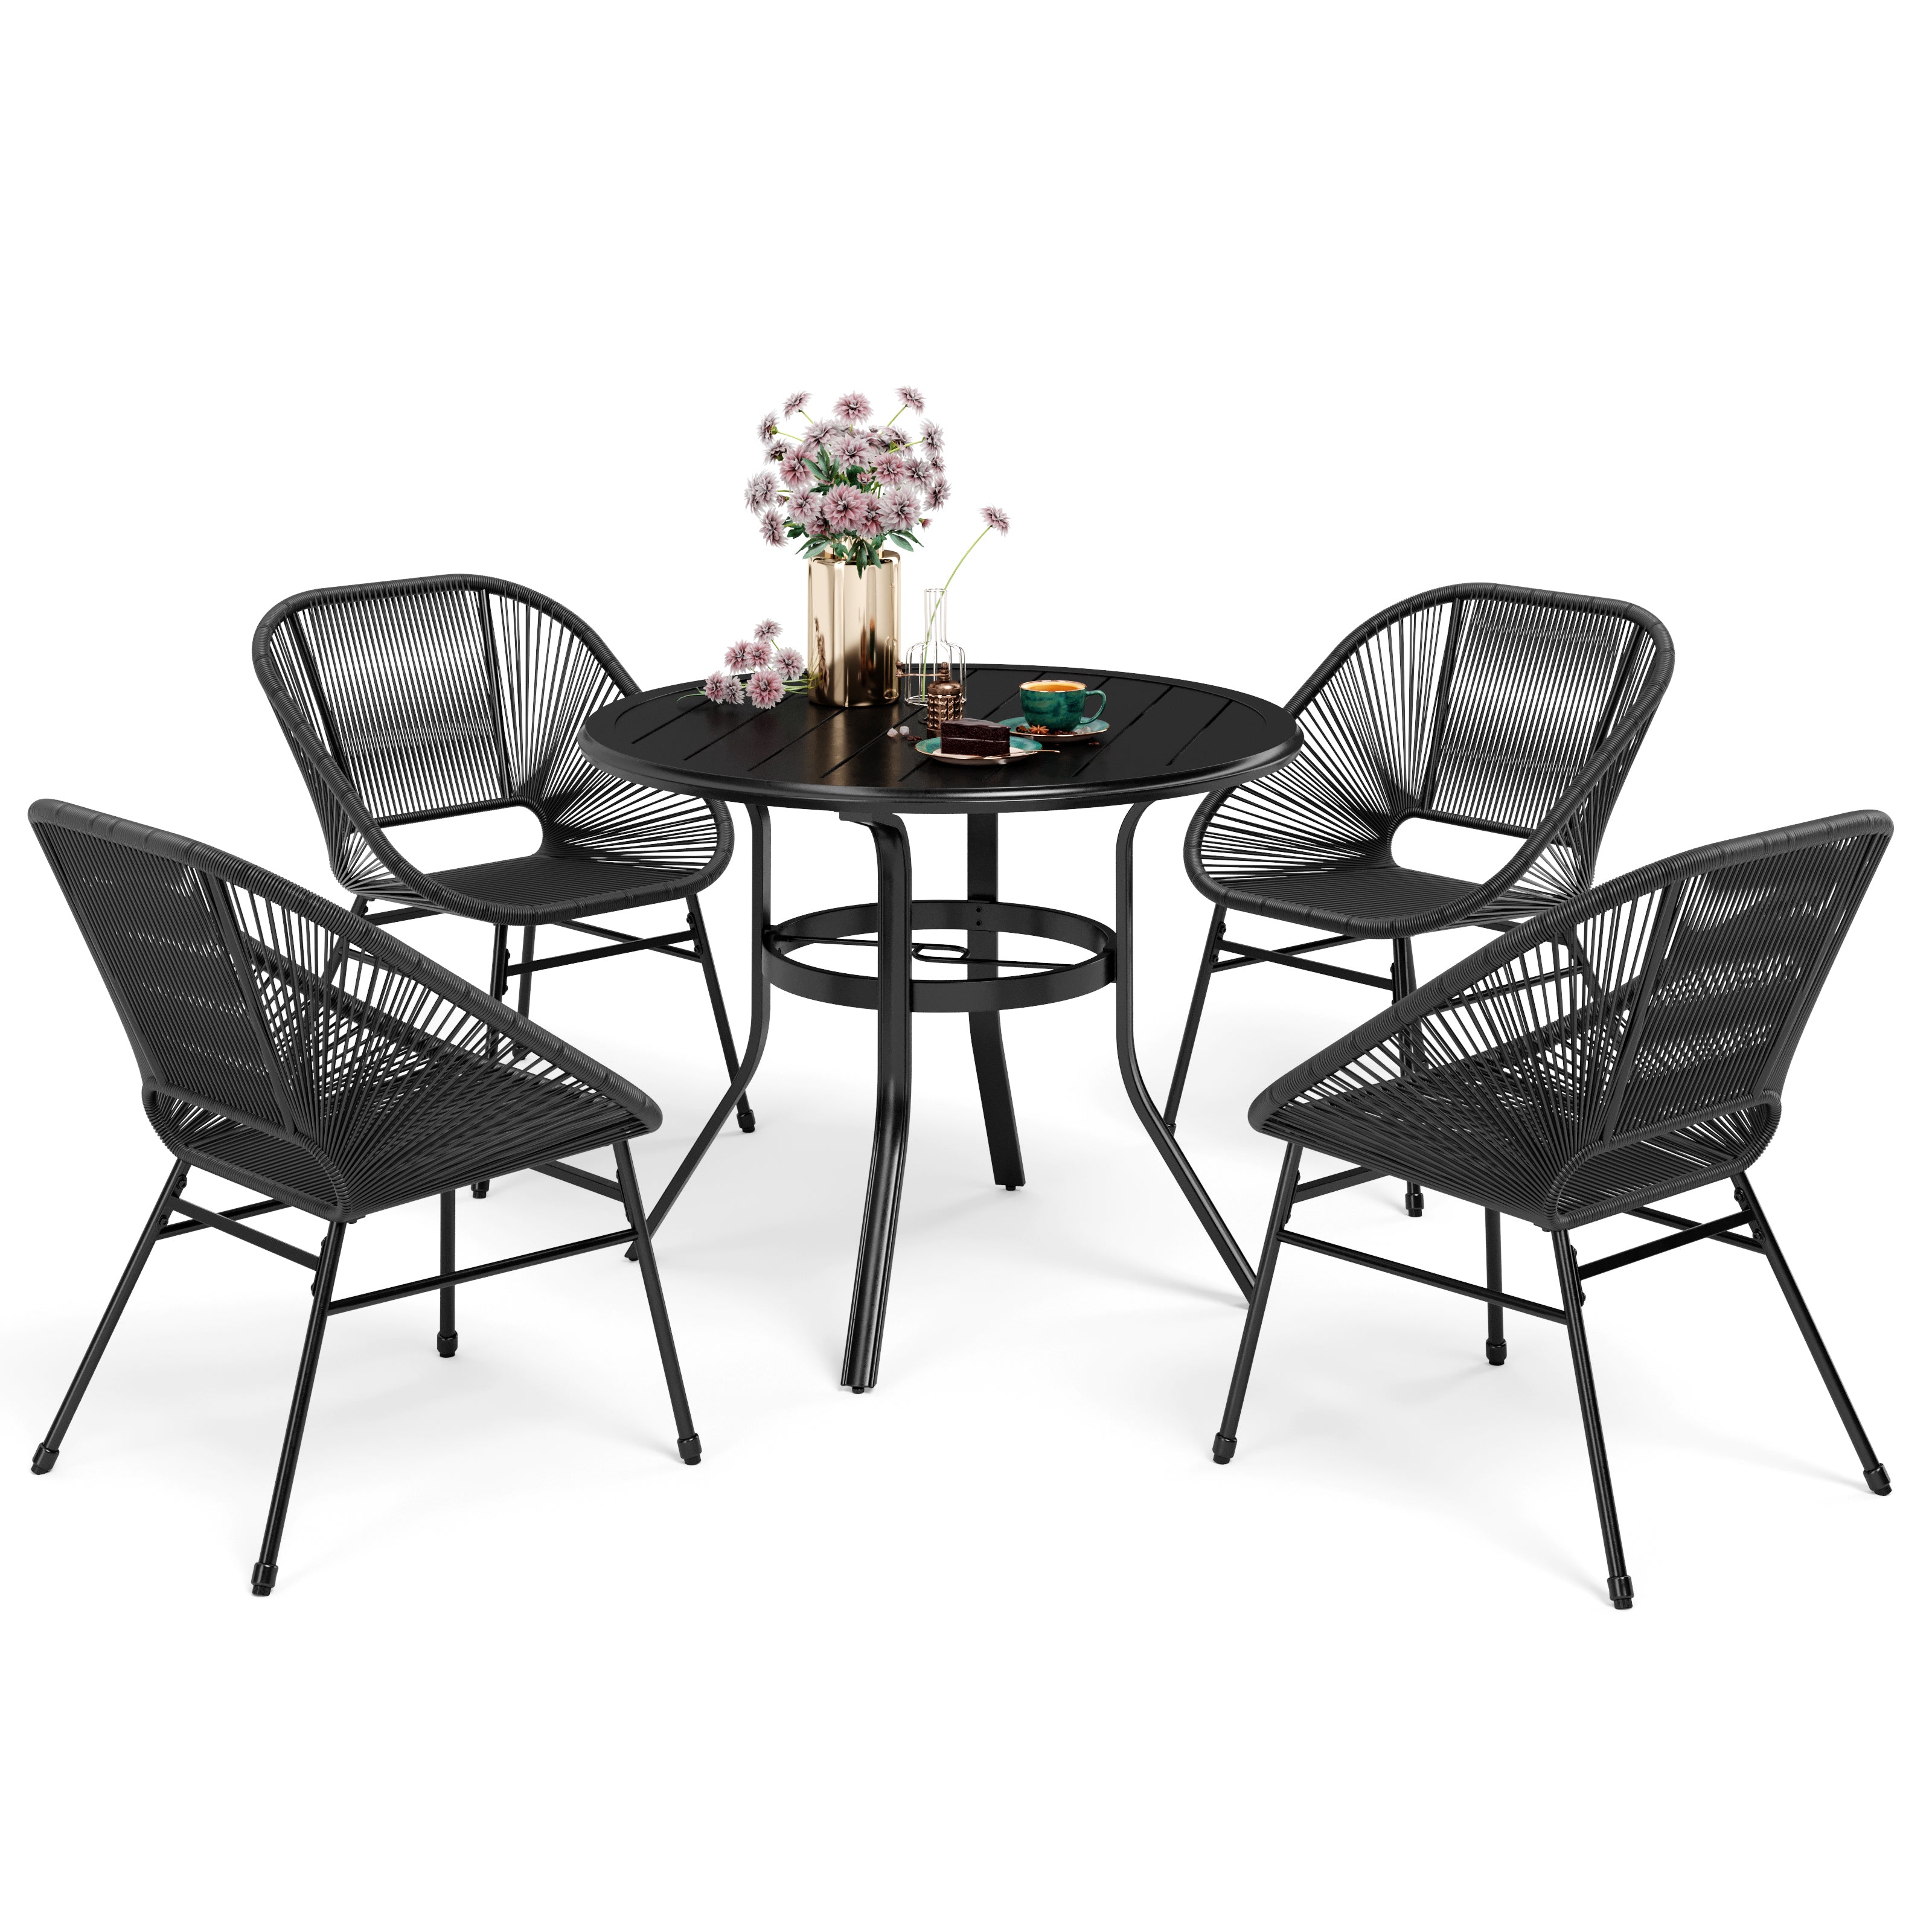 Sophia & William 5 Piece Patio Dining Set E-coated Round Table Woven Rattan Chairs